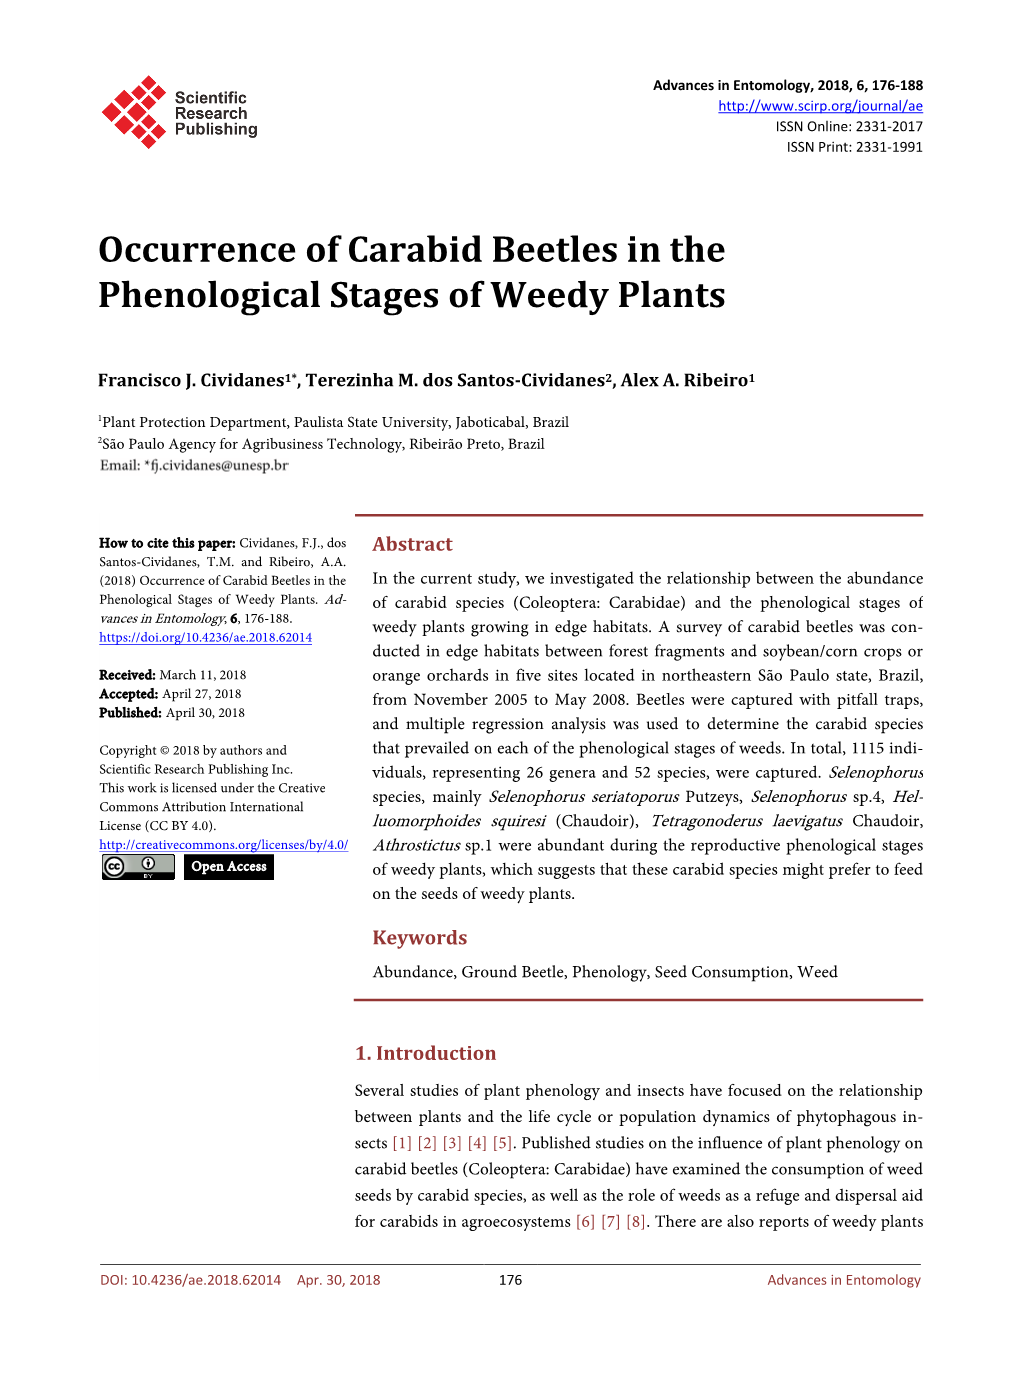 Occurrence of Carabid Beetles in the Phenological Stages of Weedy Plants